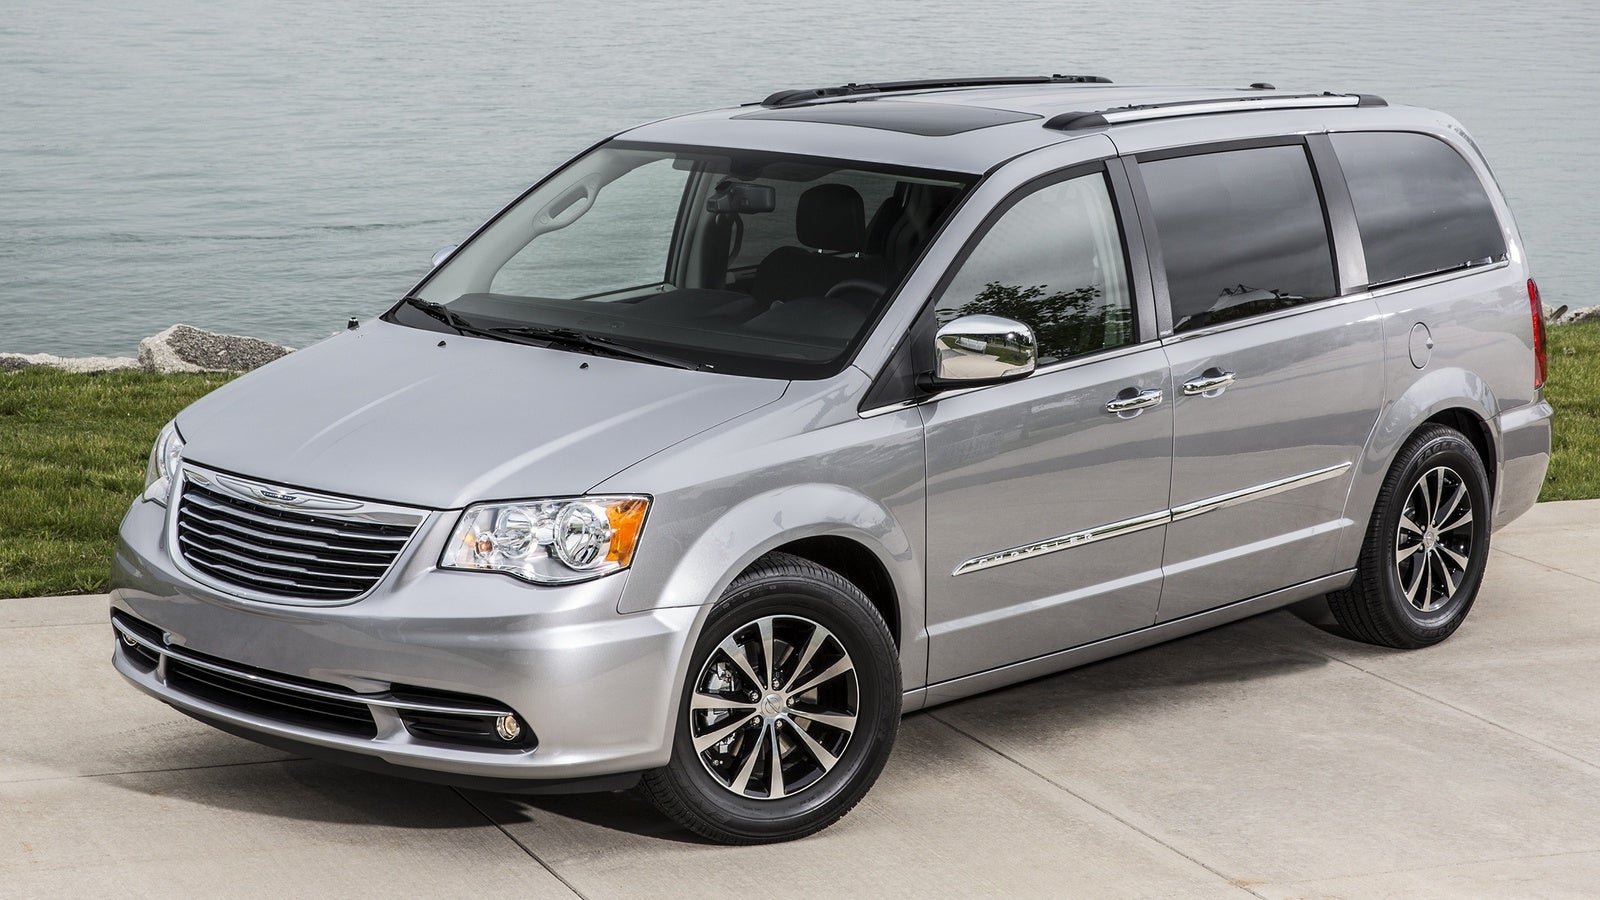 2005 Chrysler town and country touring edition #4